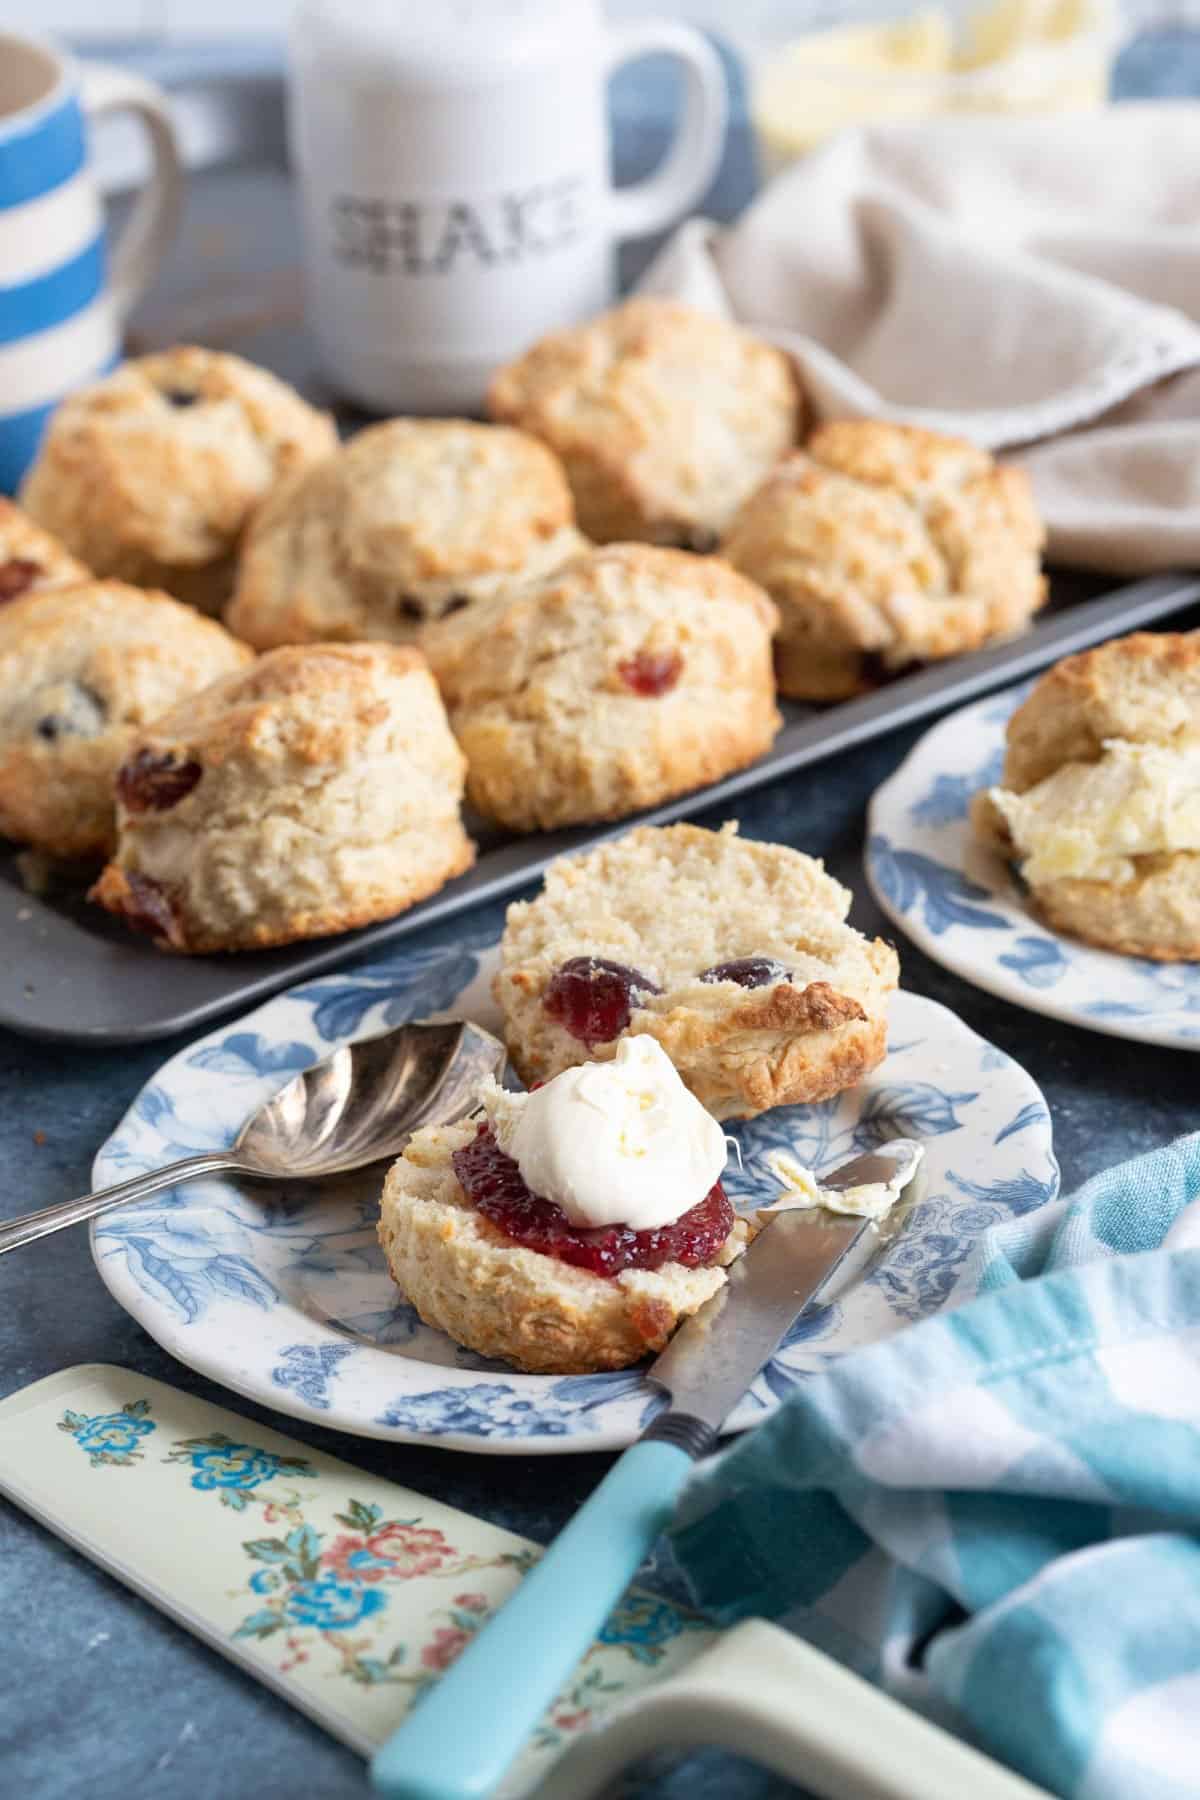 A tray of cherry and almond scones. One scone is on a plate in the foreground and split in half with jam and clotted cream.